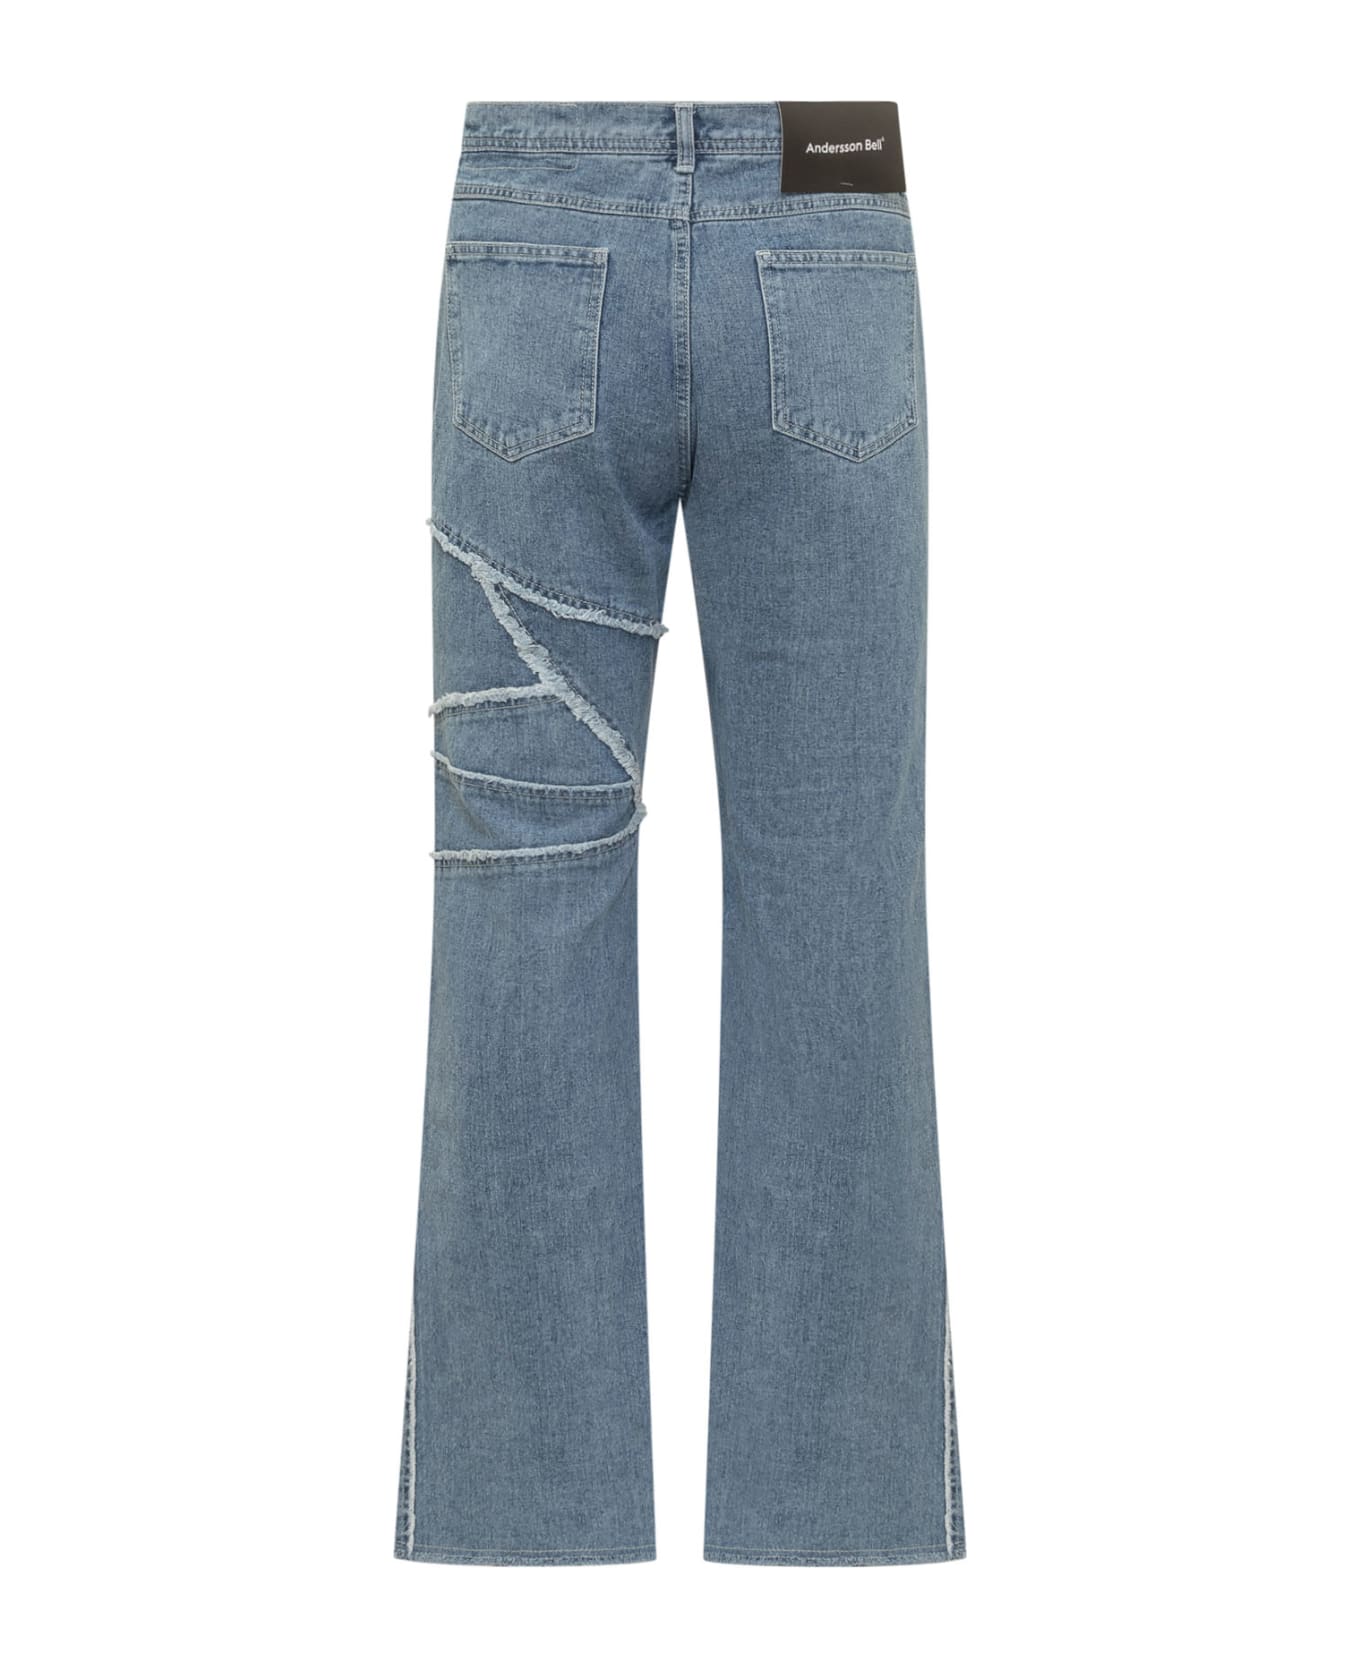 Andersson Bell Ghentel Jeans - WASBLU デニム